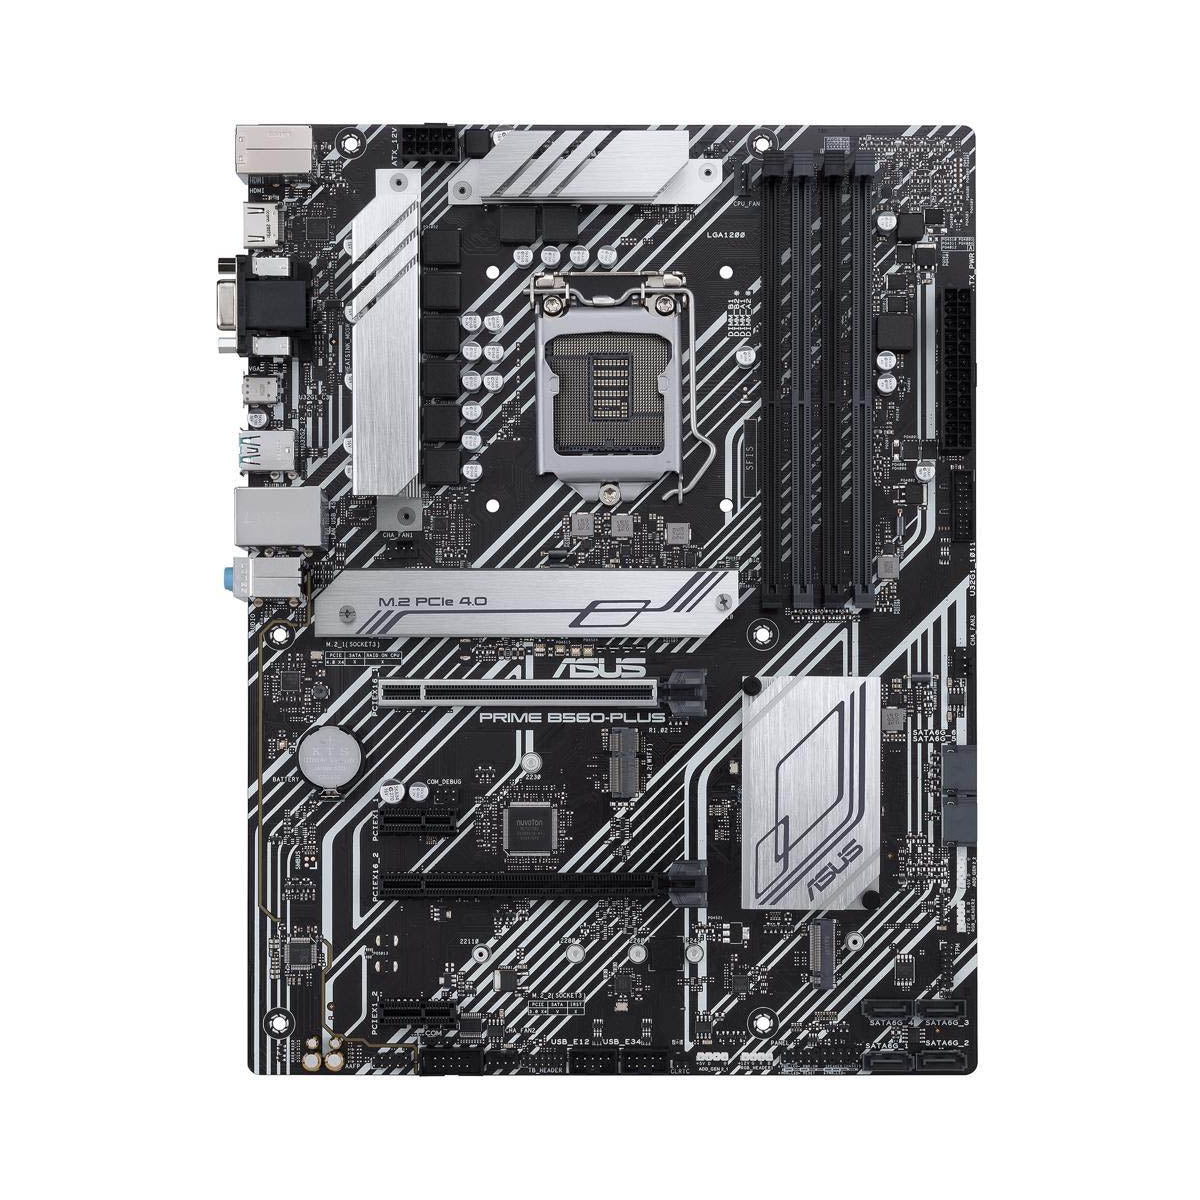 ASUS Prime B560-Plus ATX LGA 1200 Motherboard with Thunderbolt 4 and PCIe 4.0 Support